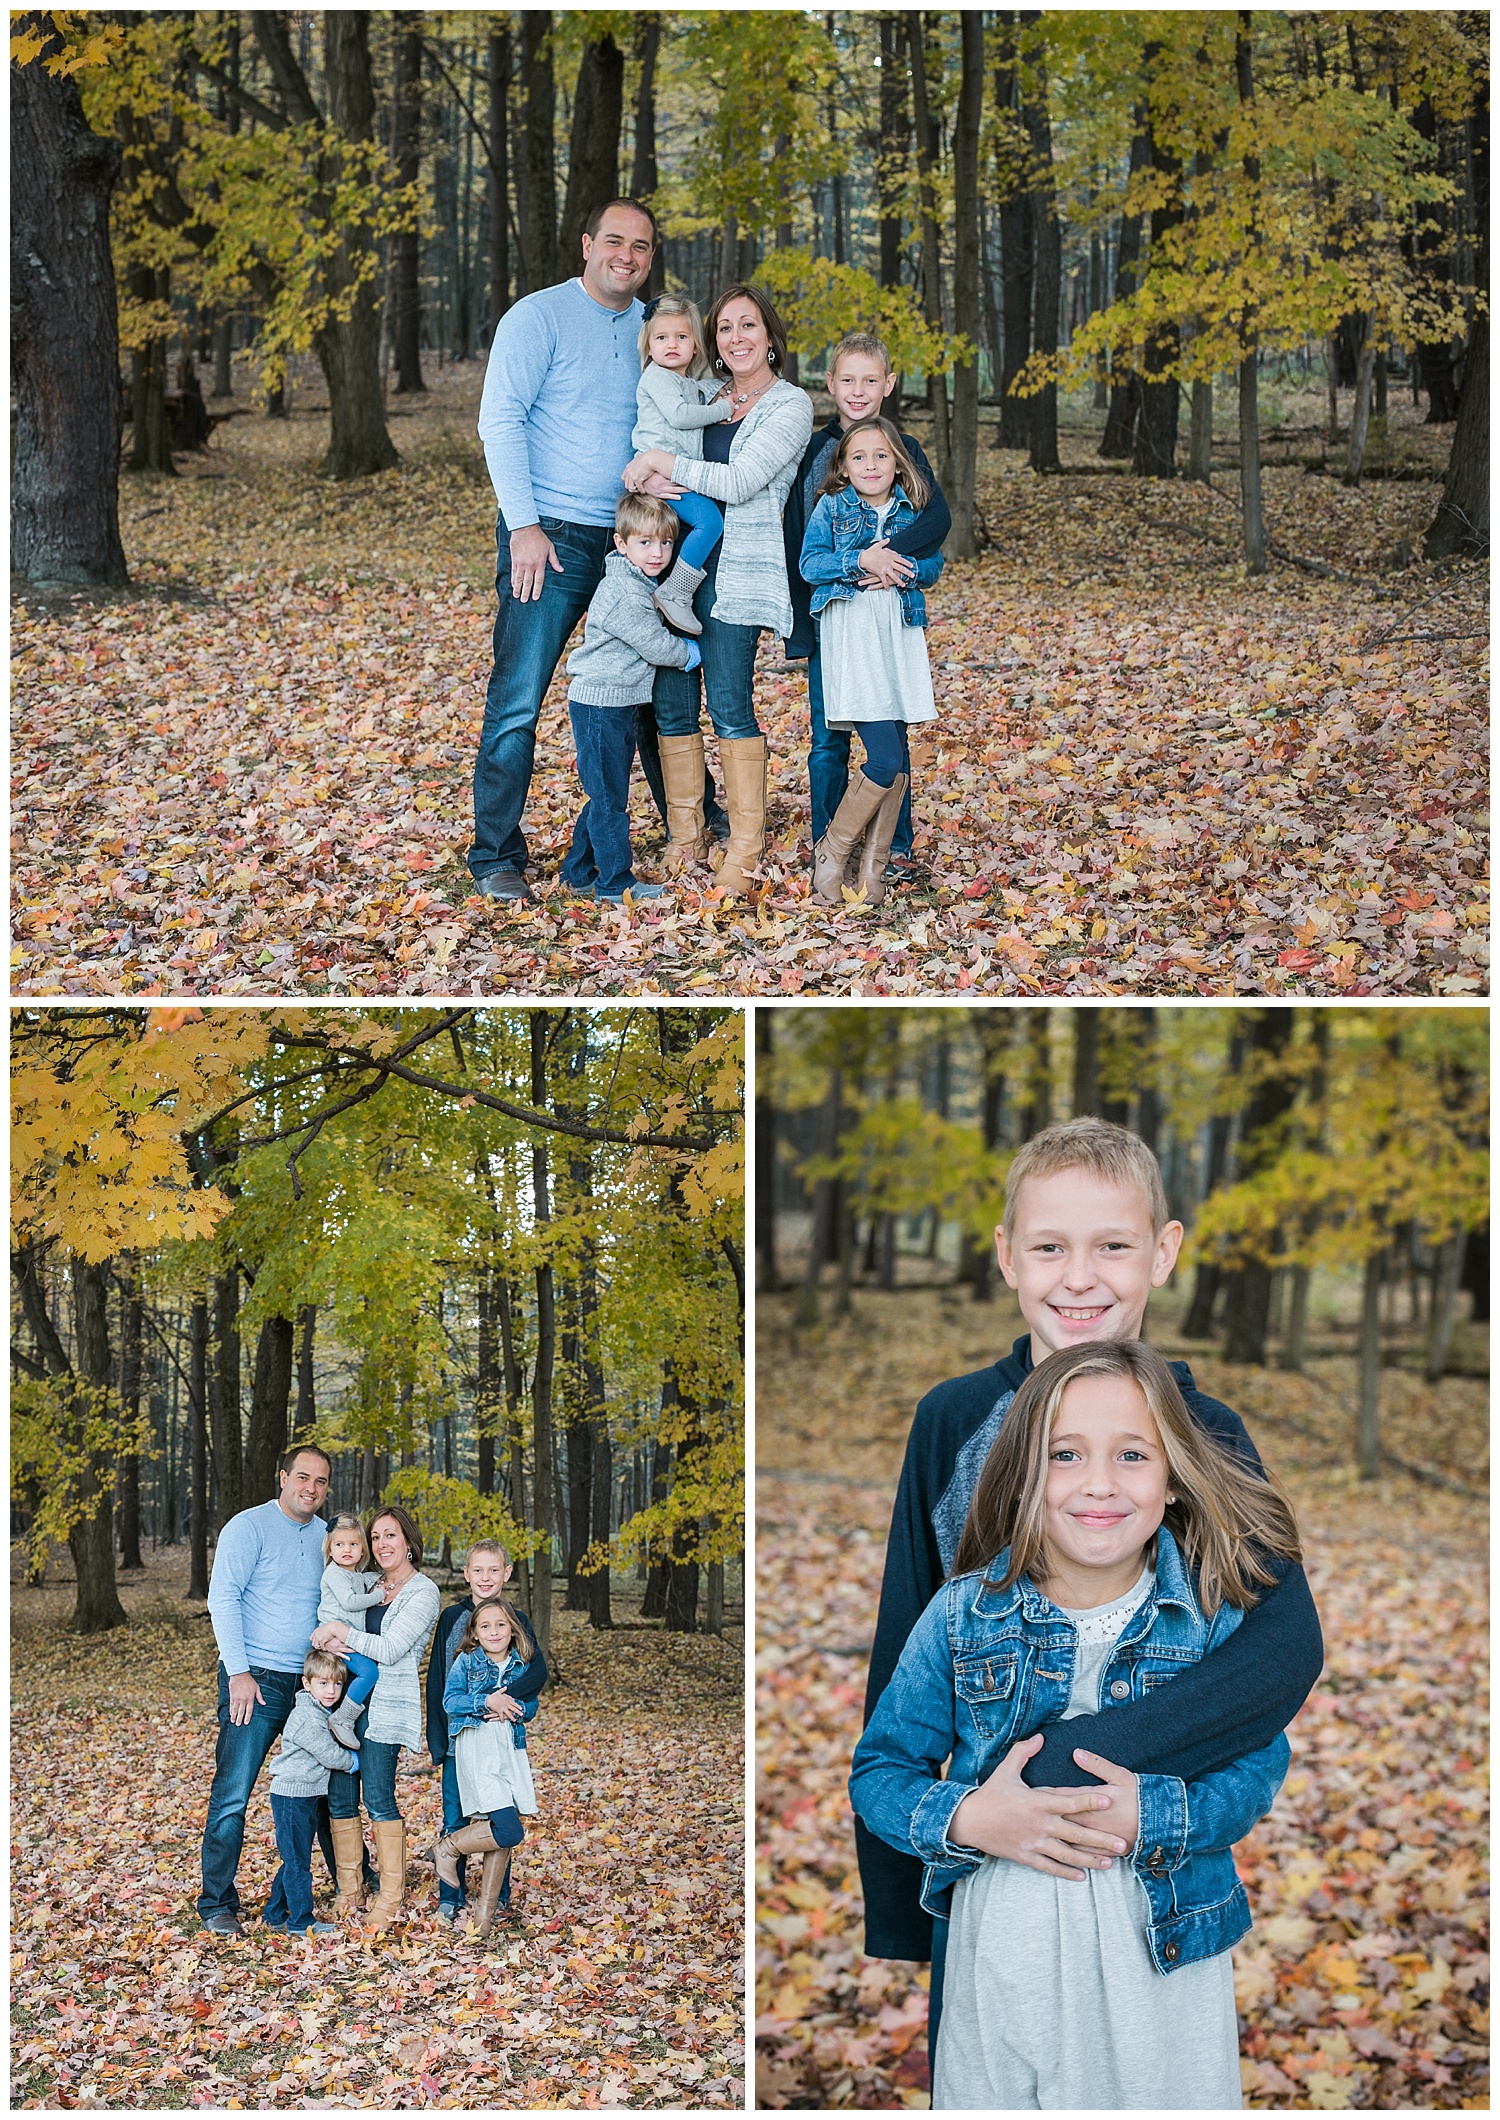 The Schurr family session at Letchworth state park - Whimsy roots photography 1.jpg